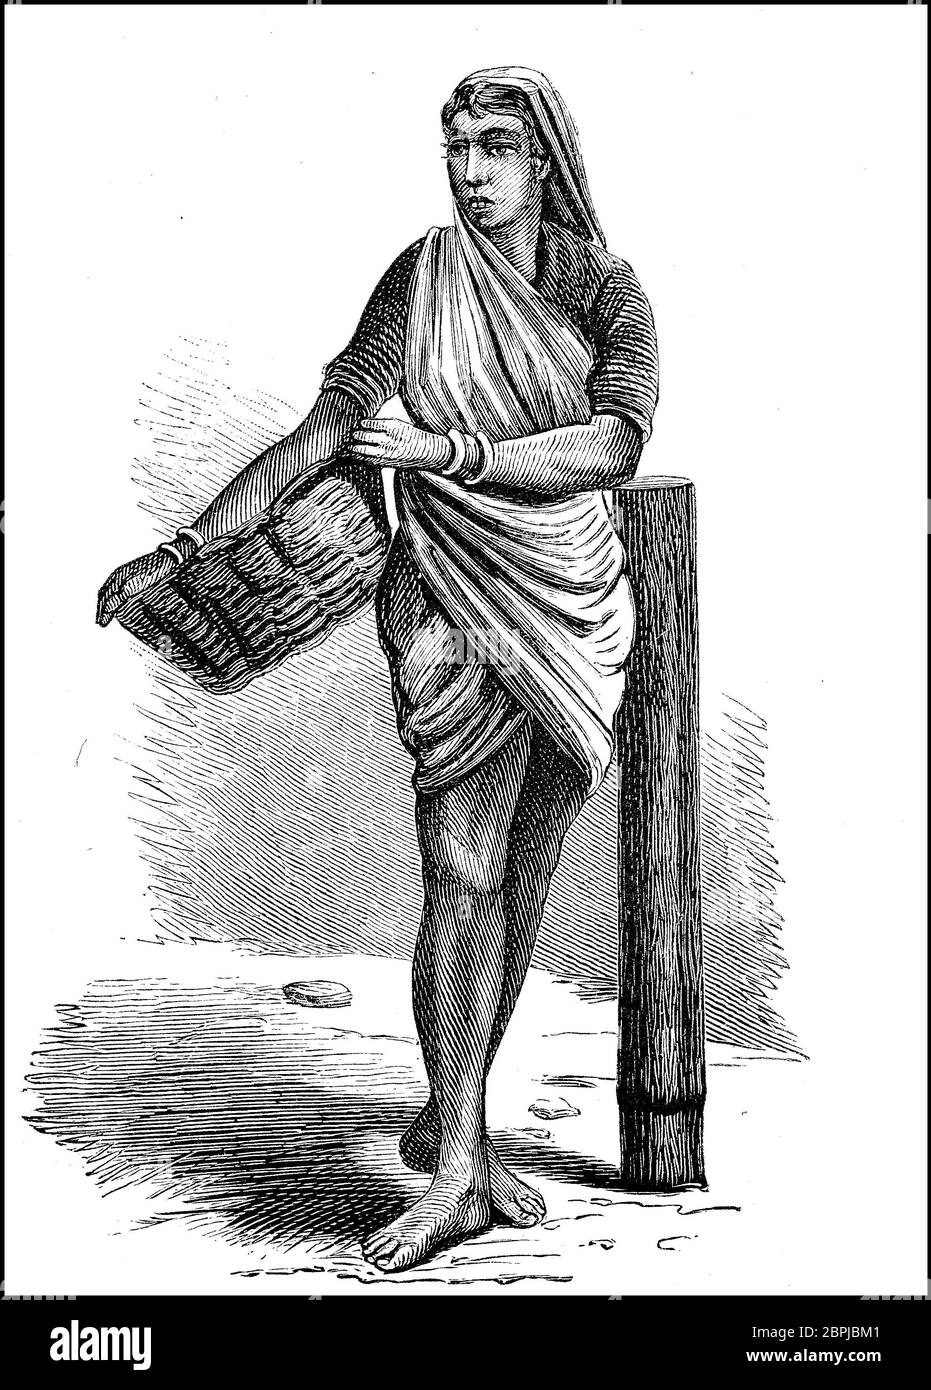 Woman Canaresin from Mangalore, members of a minority from Kerala, India, women in the 19th century  /  Frau, Canaresin aus Mangalur, Angehörige einer Minderheit aus Kerala, Indien, Frauen im 19. Jahrhundert, Historisch, historical, digital improved reproduction of an original from the 19th century / digitale Reproduktion einer Originalvorlage aus dem 19. Jahrhundert Stock Photo